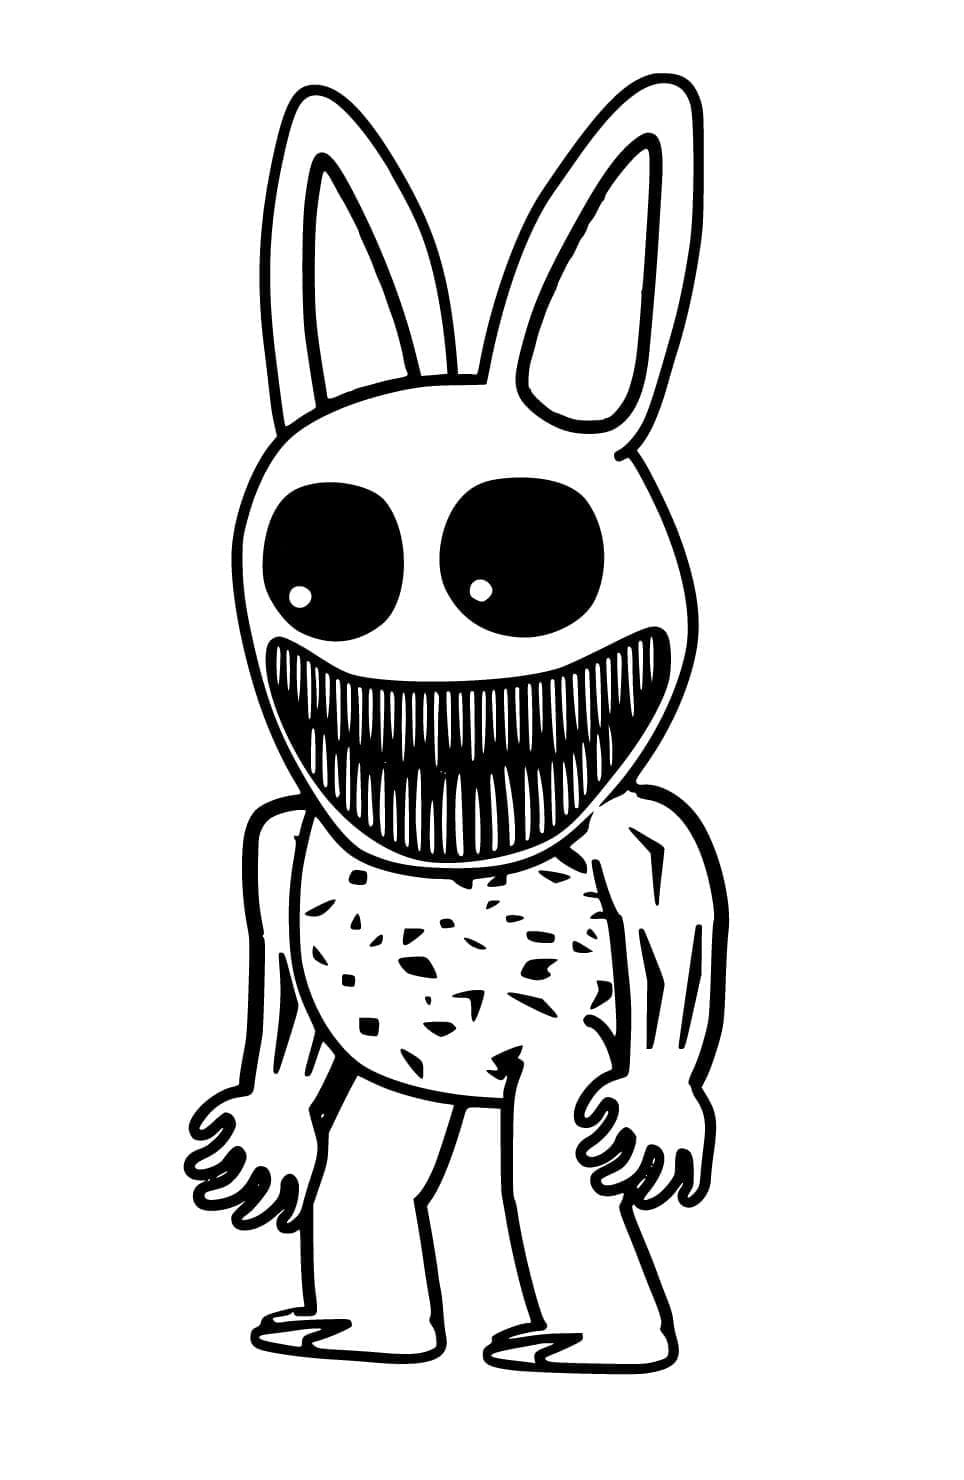 Printable Monster Rabbit in Zoonomaly Coloring Page